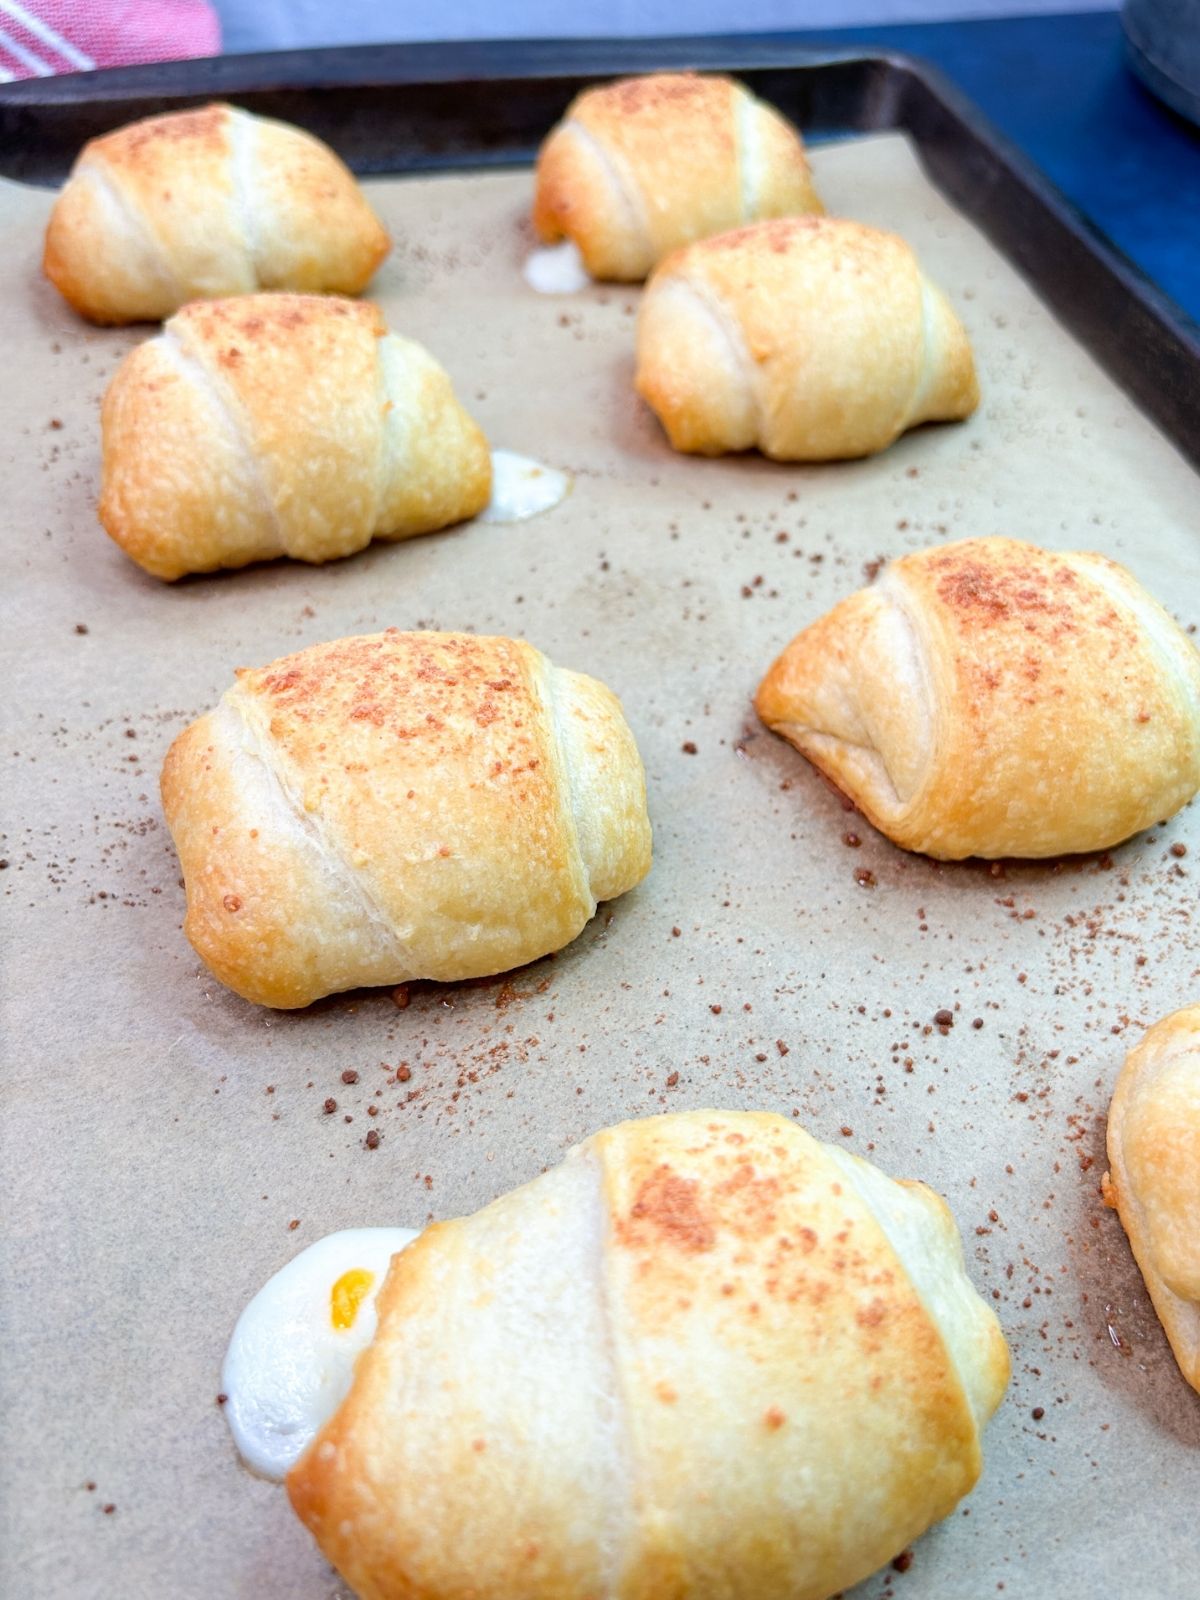 Crescent rolls with cheese and pepperoni baked on baking tray.